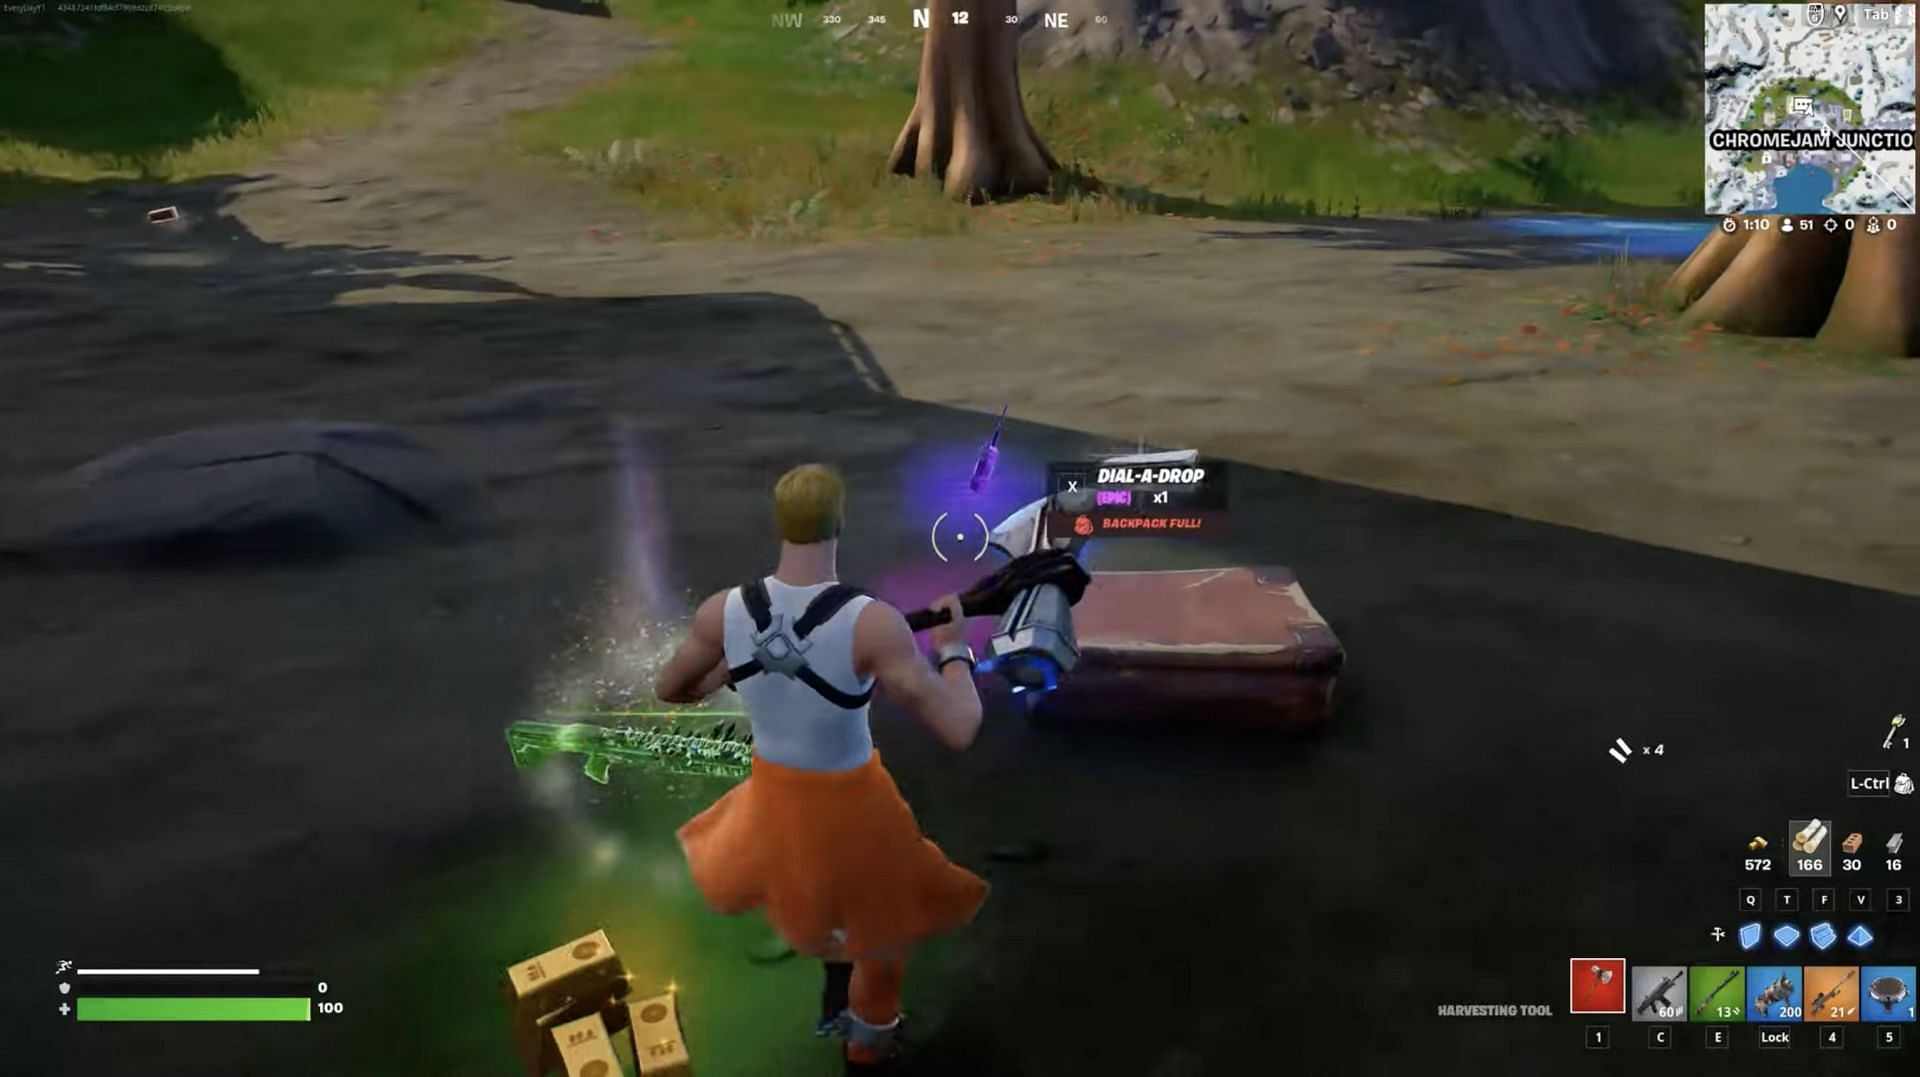 Dial-A-Drops can be found on the floor (Image via EveryDay FN on YouTube)